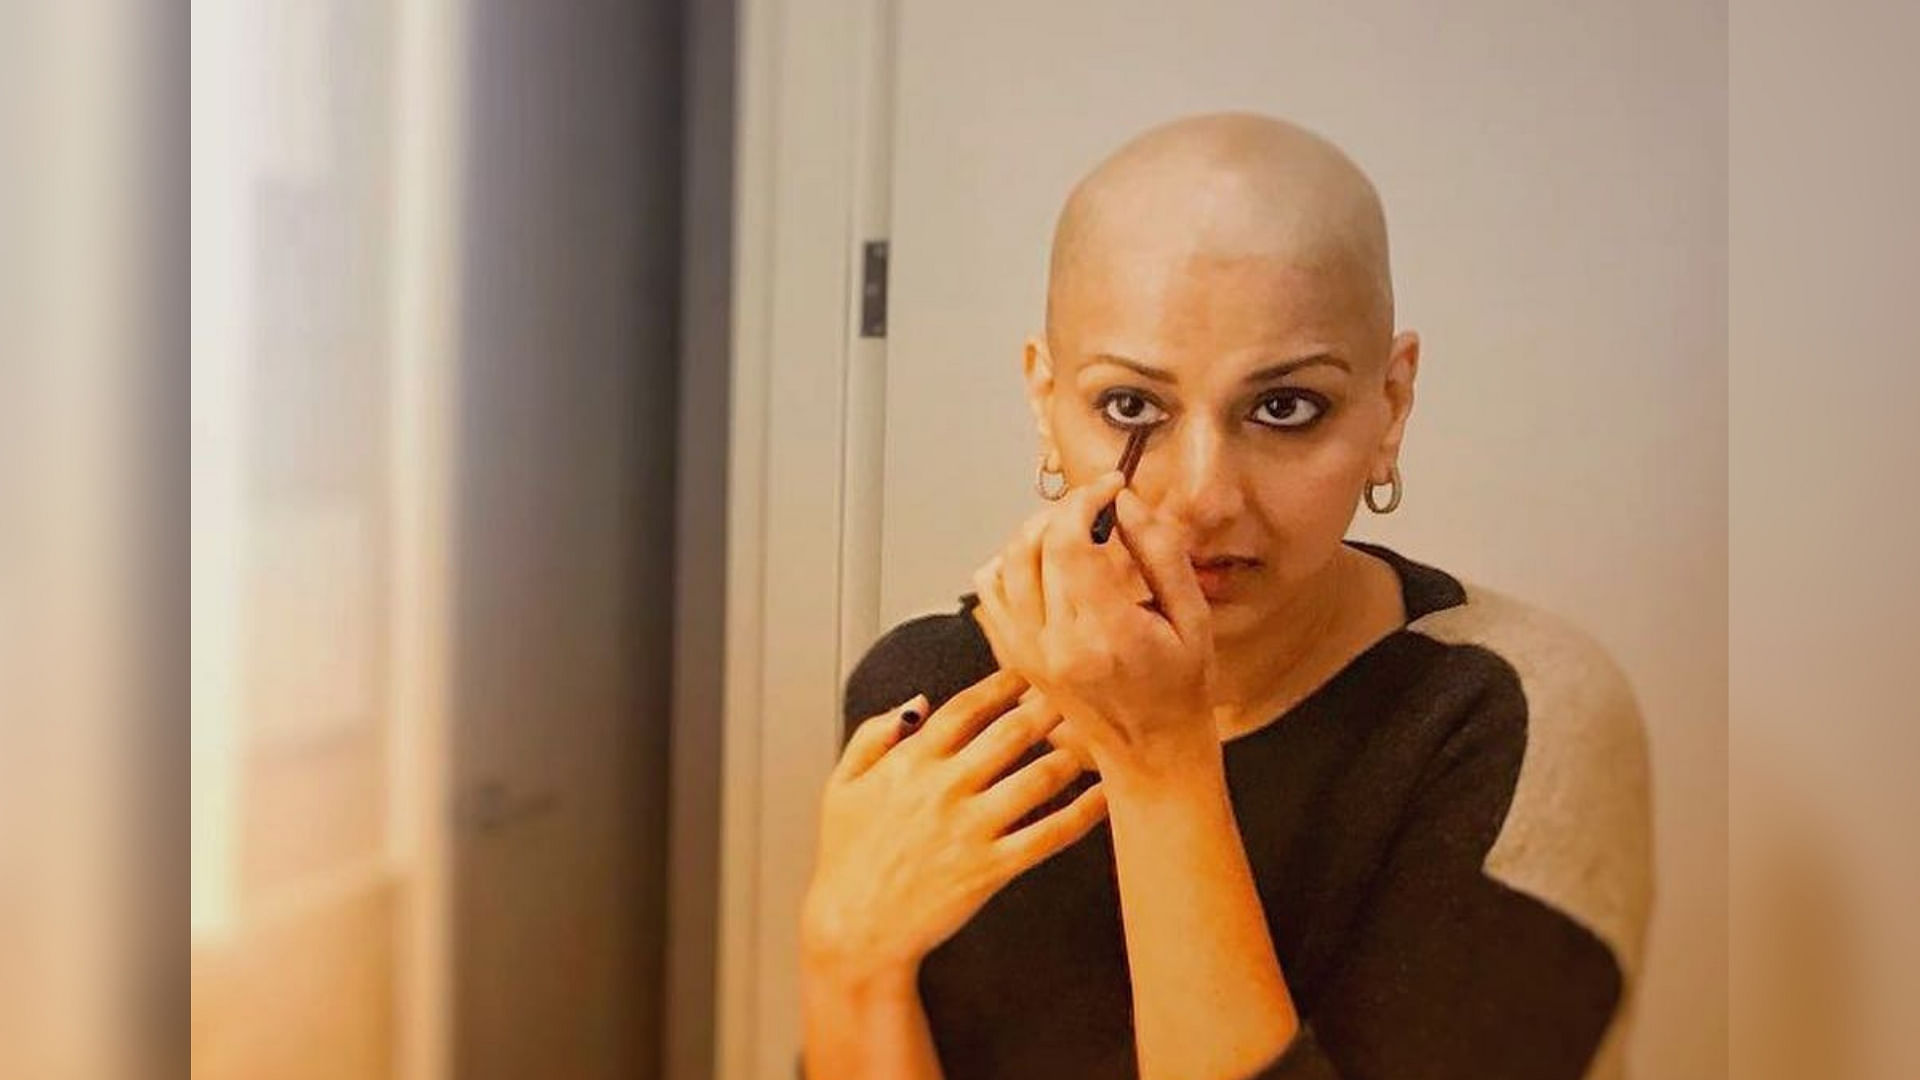 Sonali Bendre has been documenting her journey with cancer on social media.